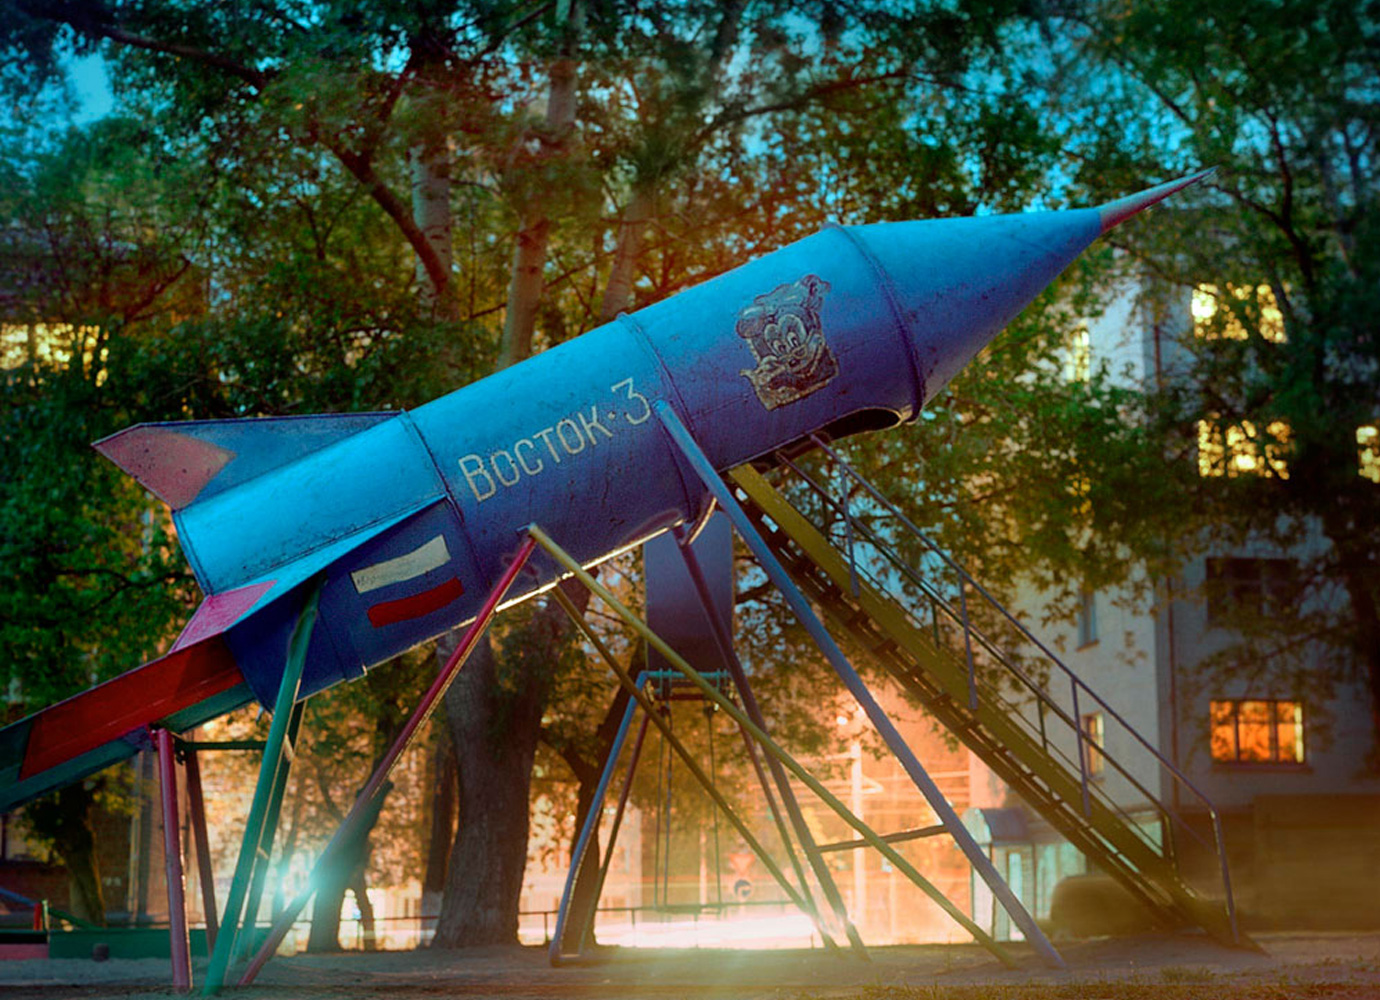 Rockets away: the space race remade as child’s play